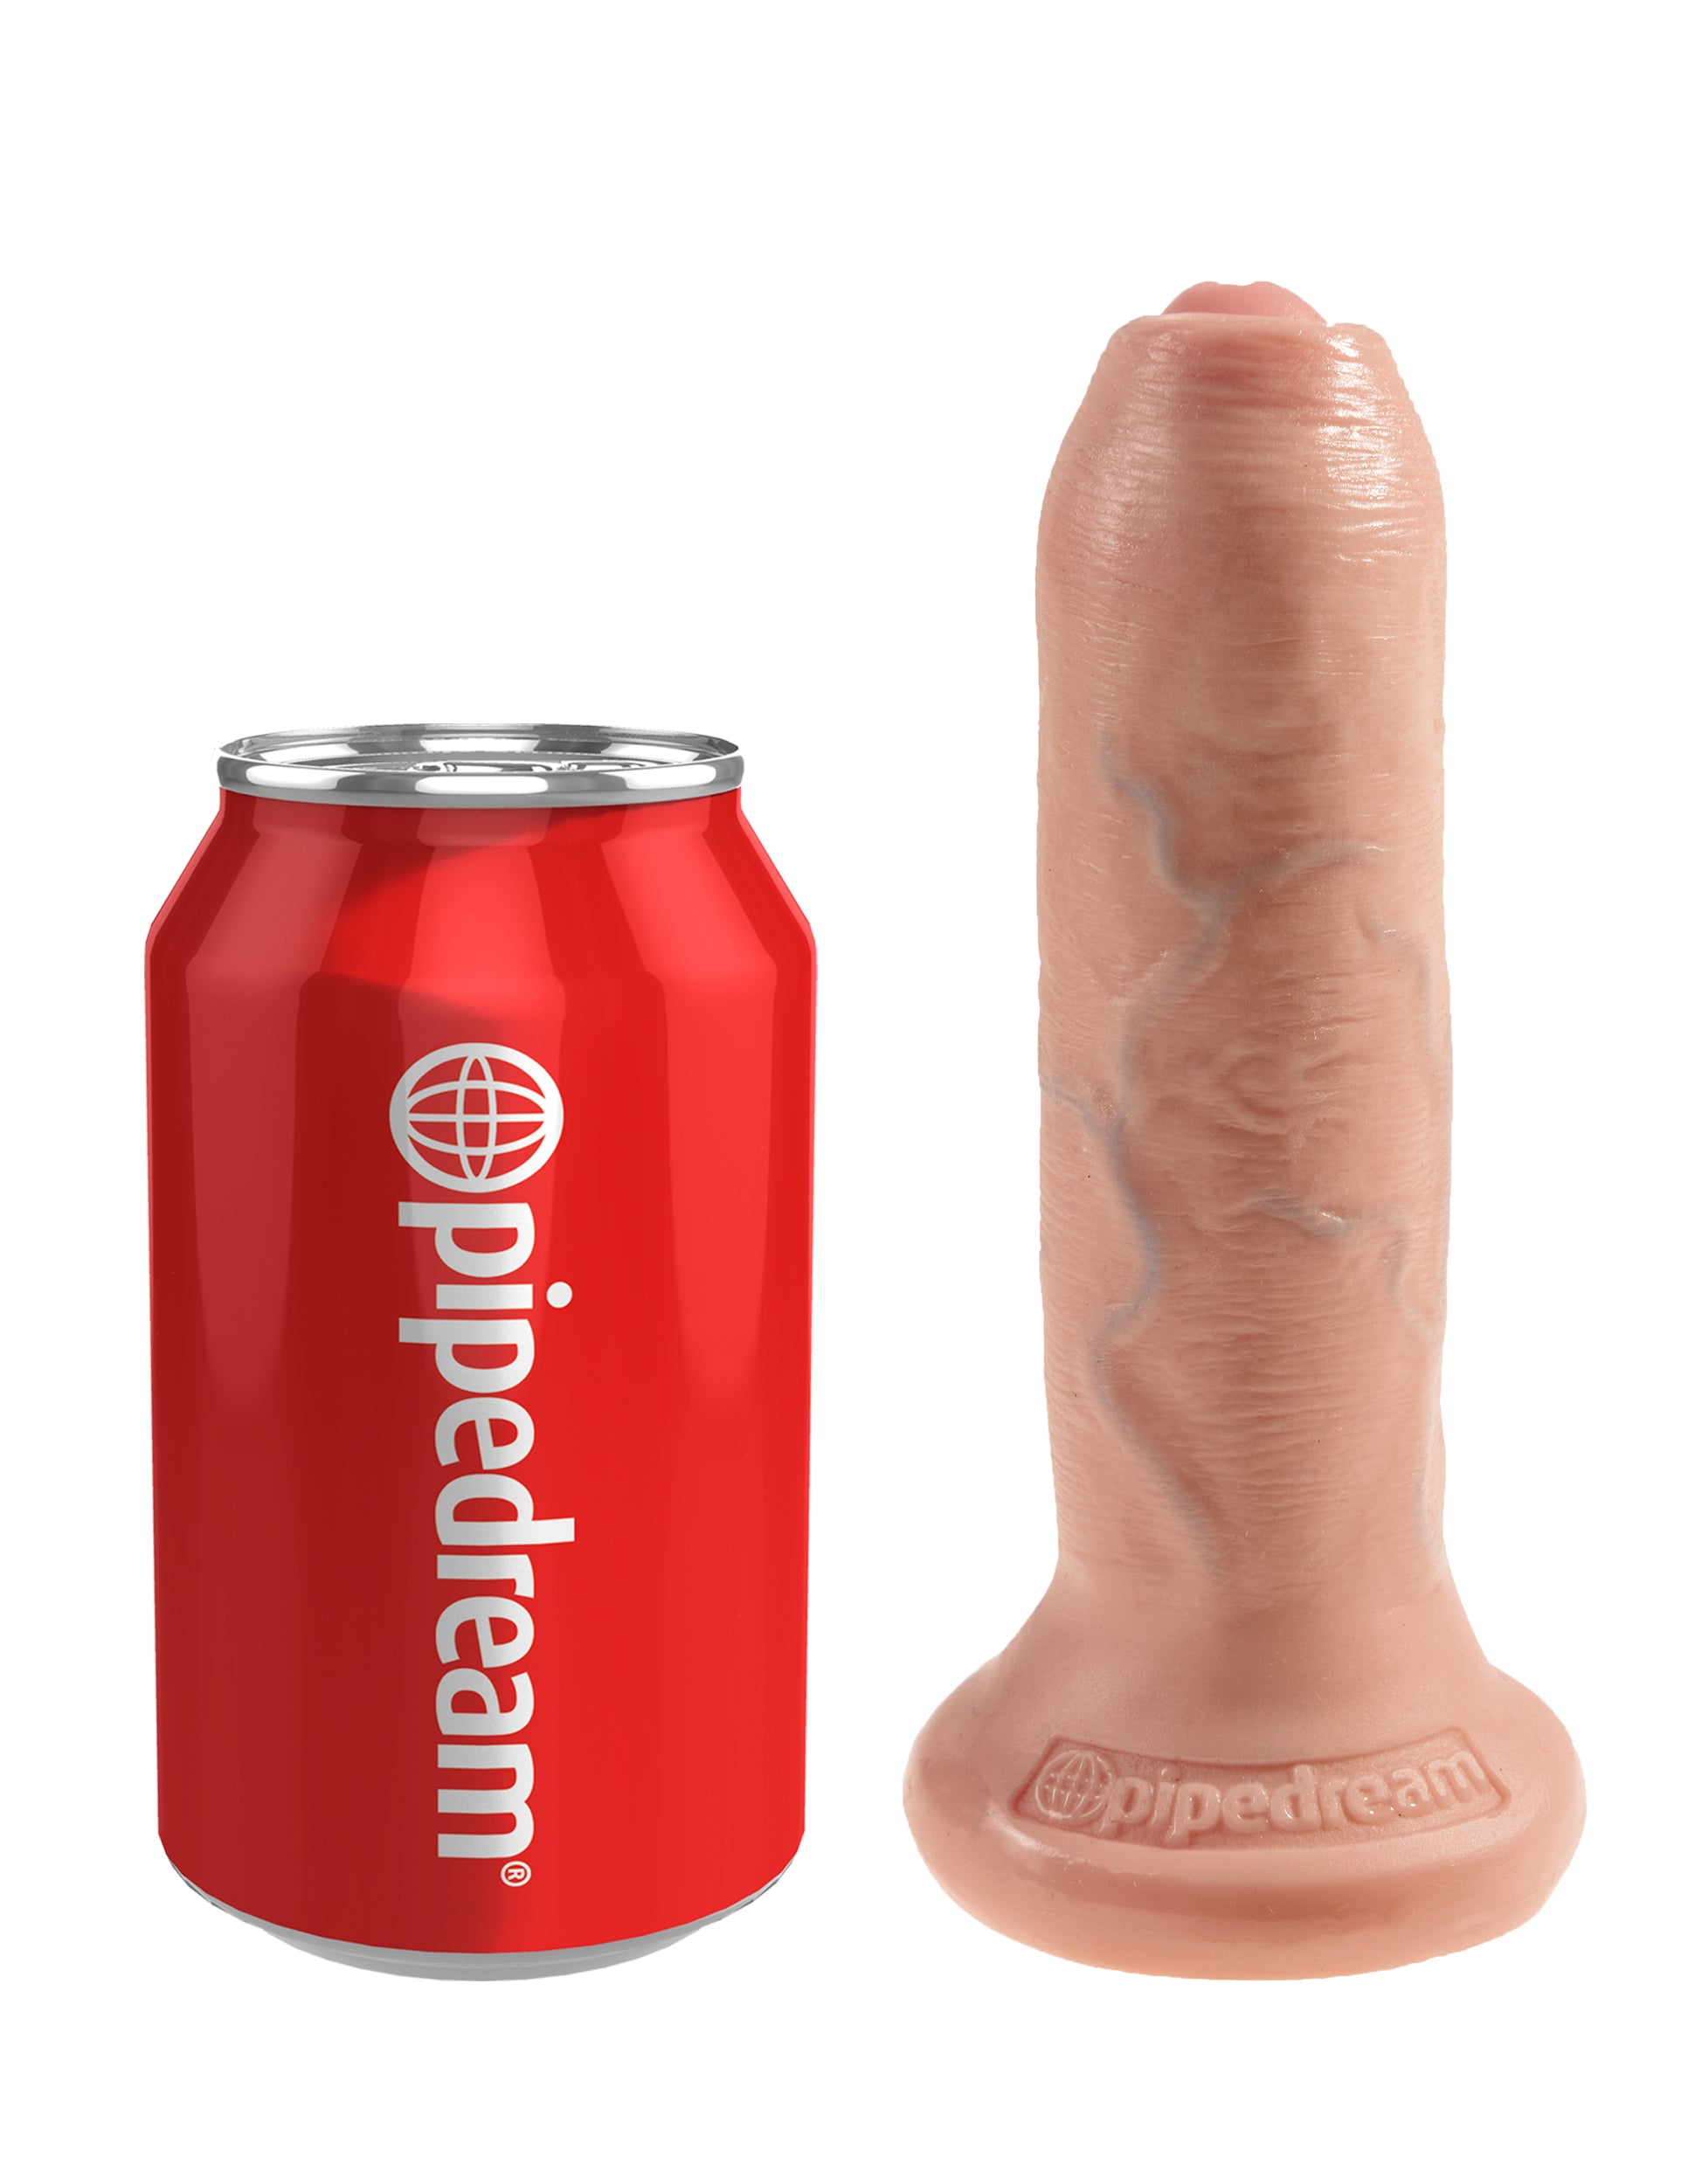 King Cock Uncut 6 inches Dildo - Realistic Foreskin & Suction Cup Base